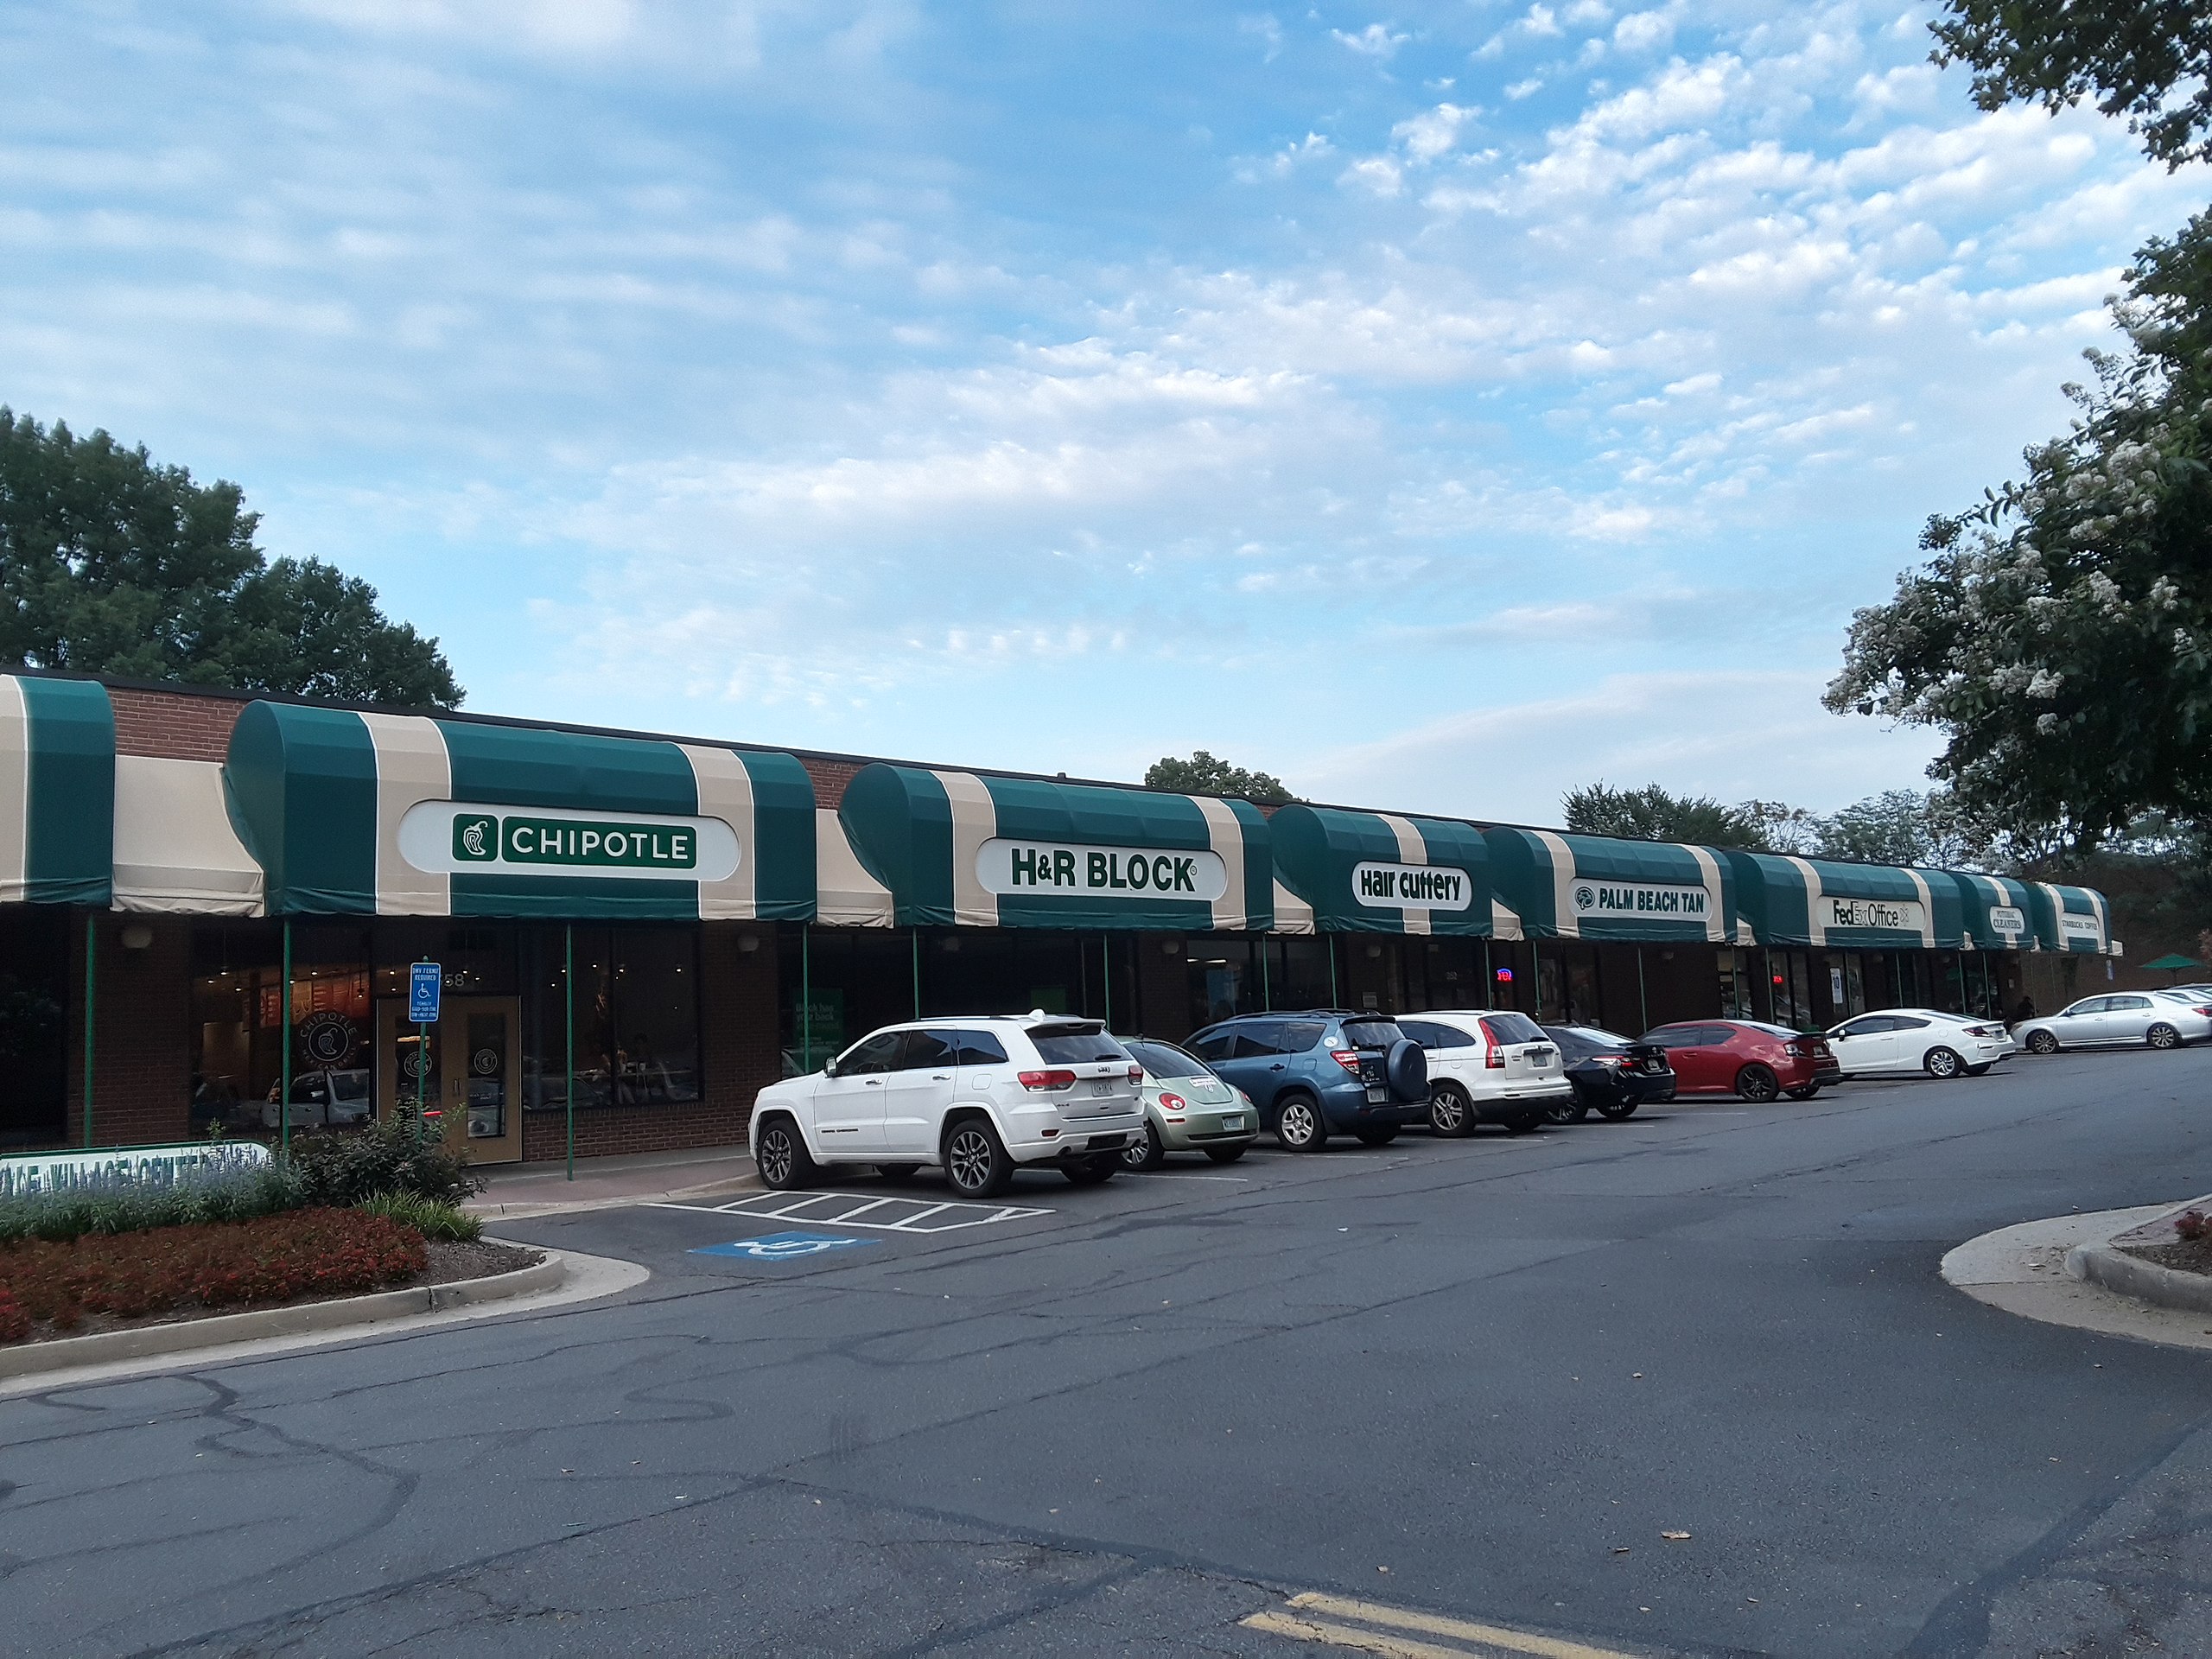 File:Strip mall storefronts in Falls Church.jpg - Wikimedia Commons